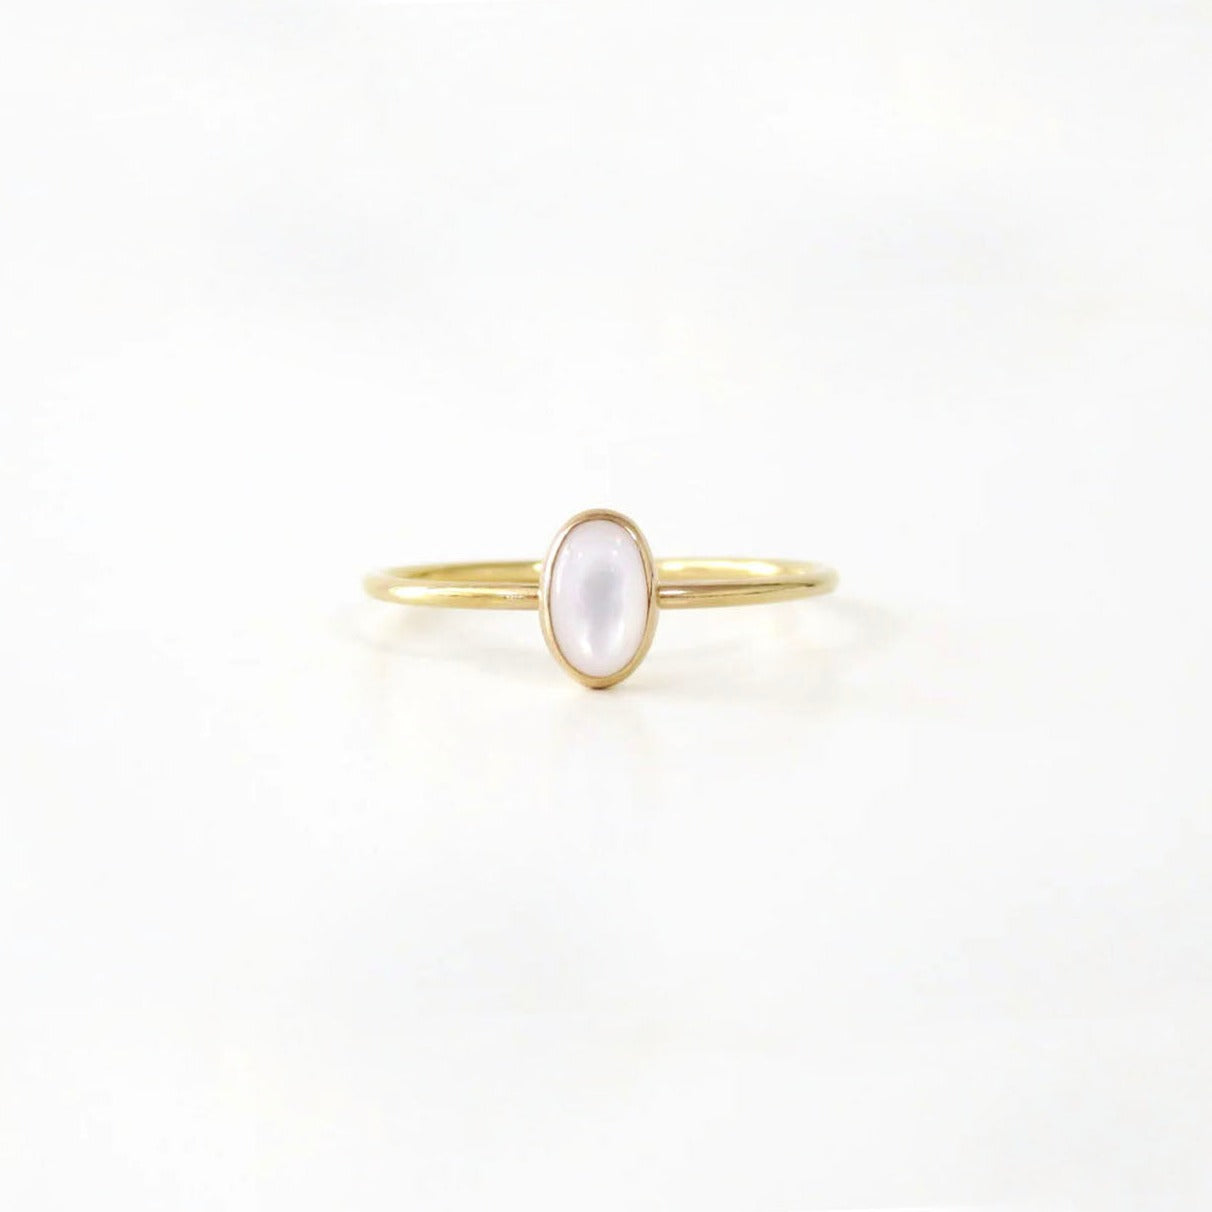 Gold ring with small oval white pearl